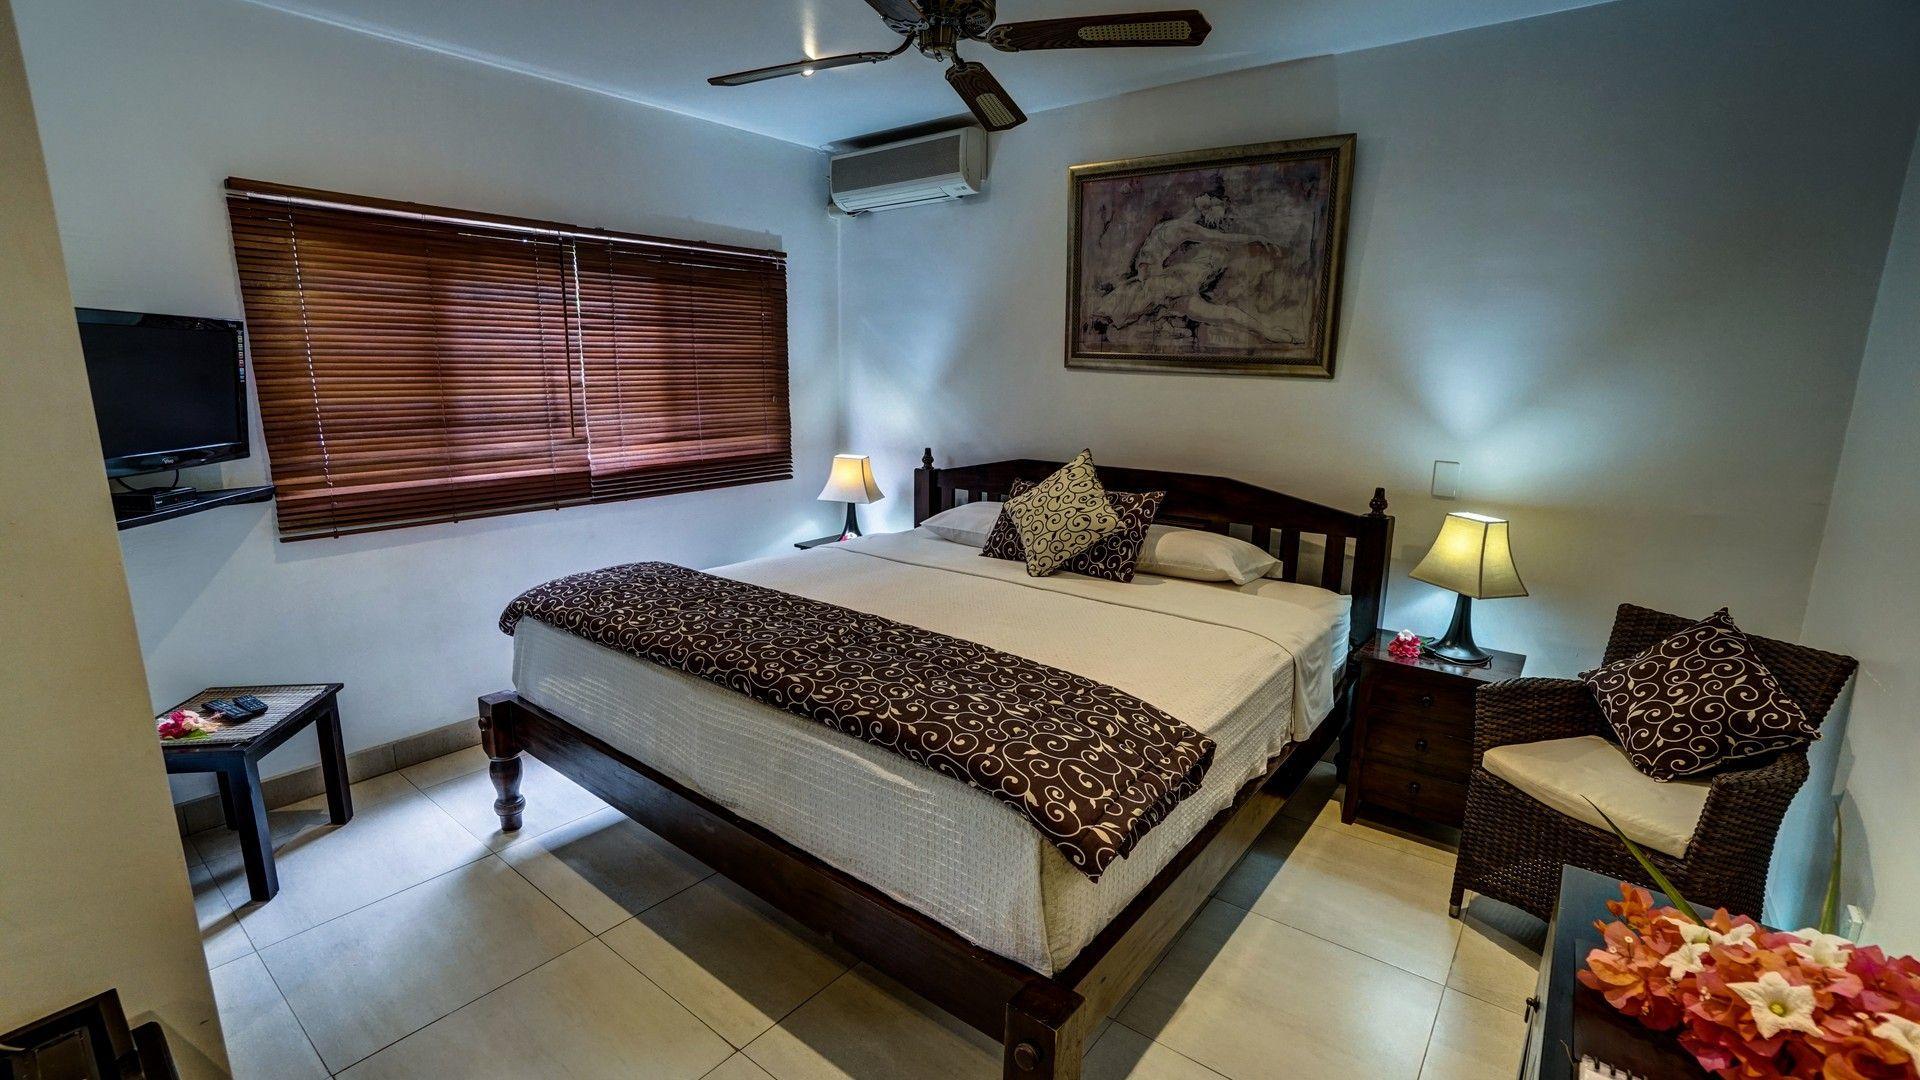 Double room and facing side-view in tropical garden, private bathroom, air conditioning, ceiling fan, fridge, TV/DVD, IDD phone, wireless Internet, coffee and tea facilities, hairdryer, in room safe